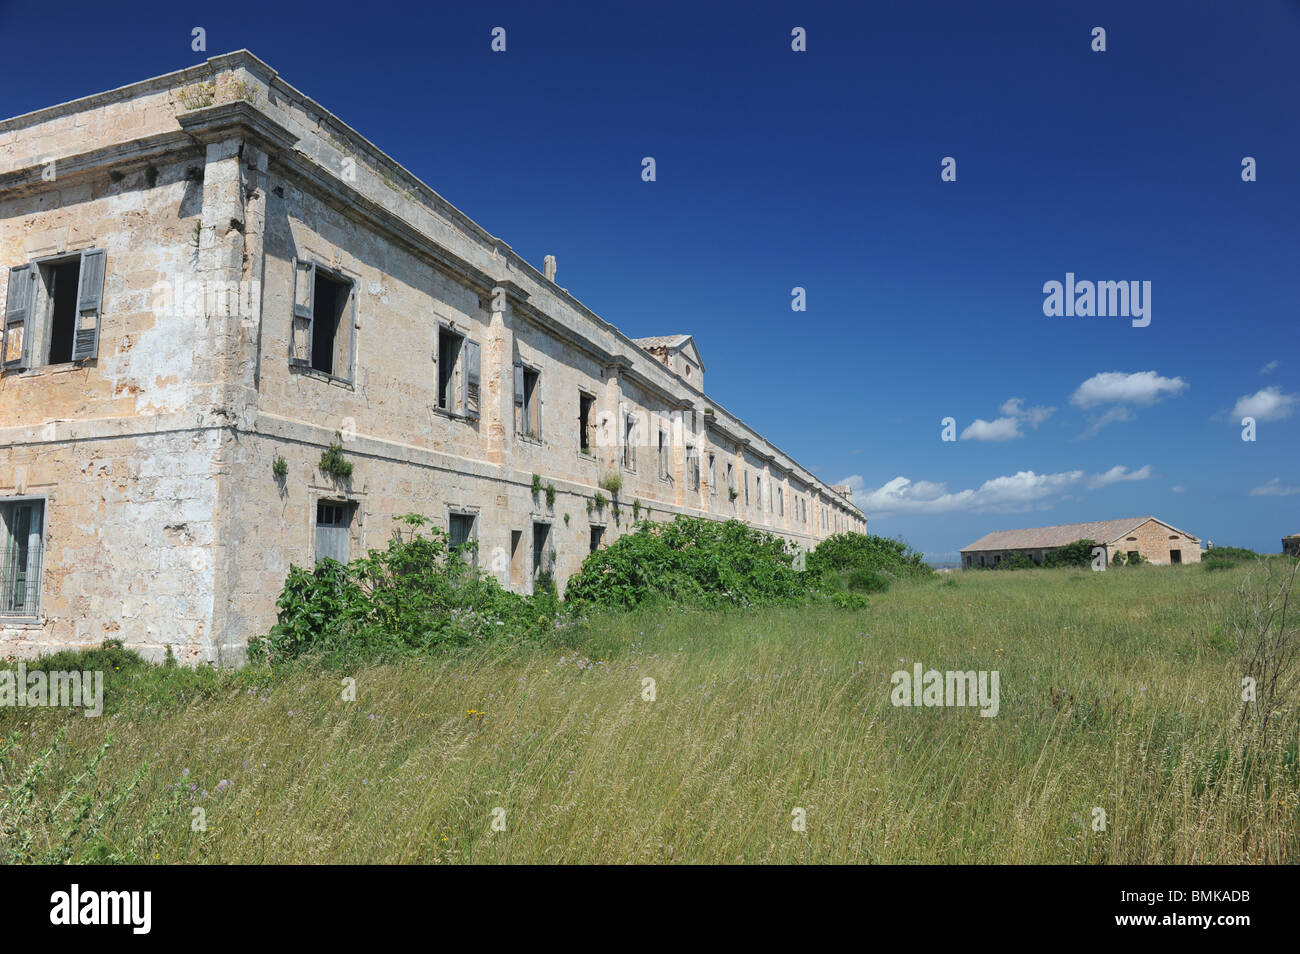 Derelict military hospital buildings La Mola, Mahon, Menorca. Cream-coloured stone is set against a deep blue sky and green grass is in the foreground Stock Photo